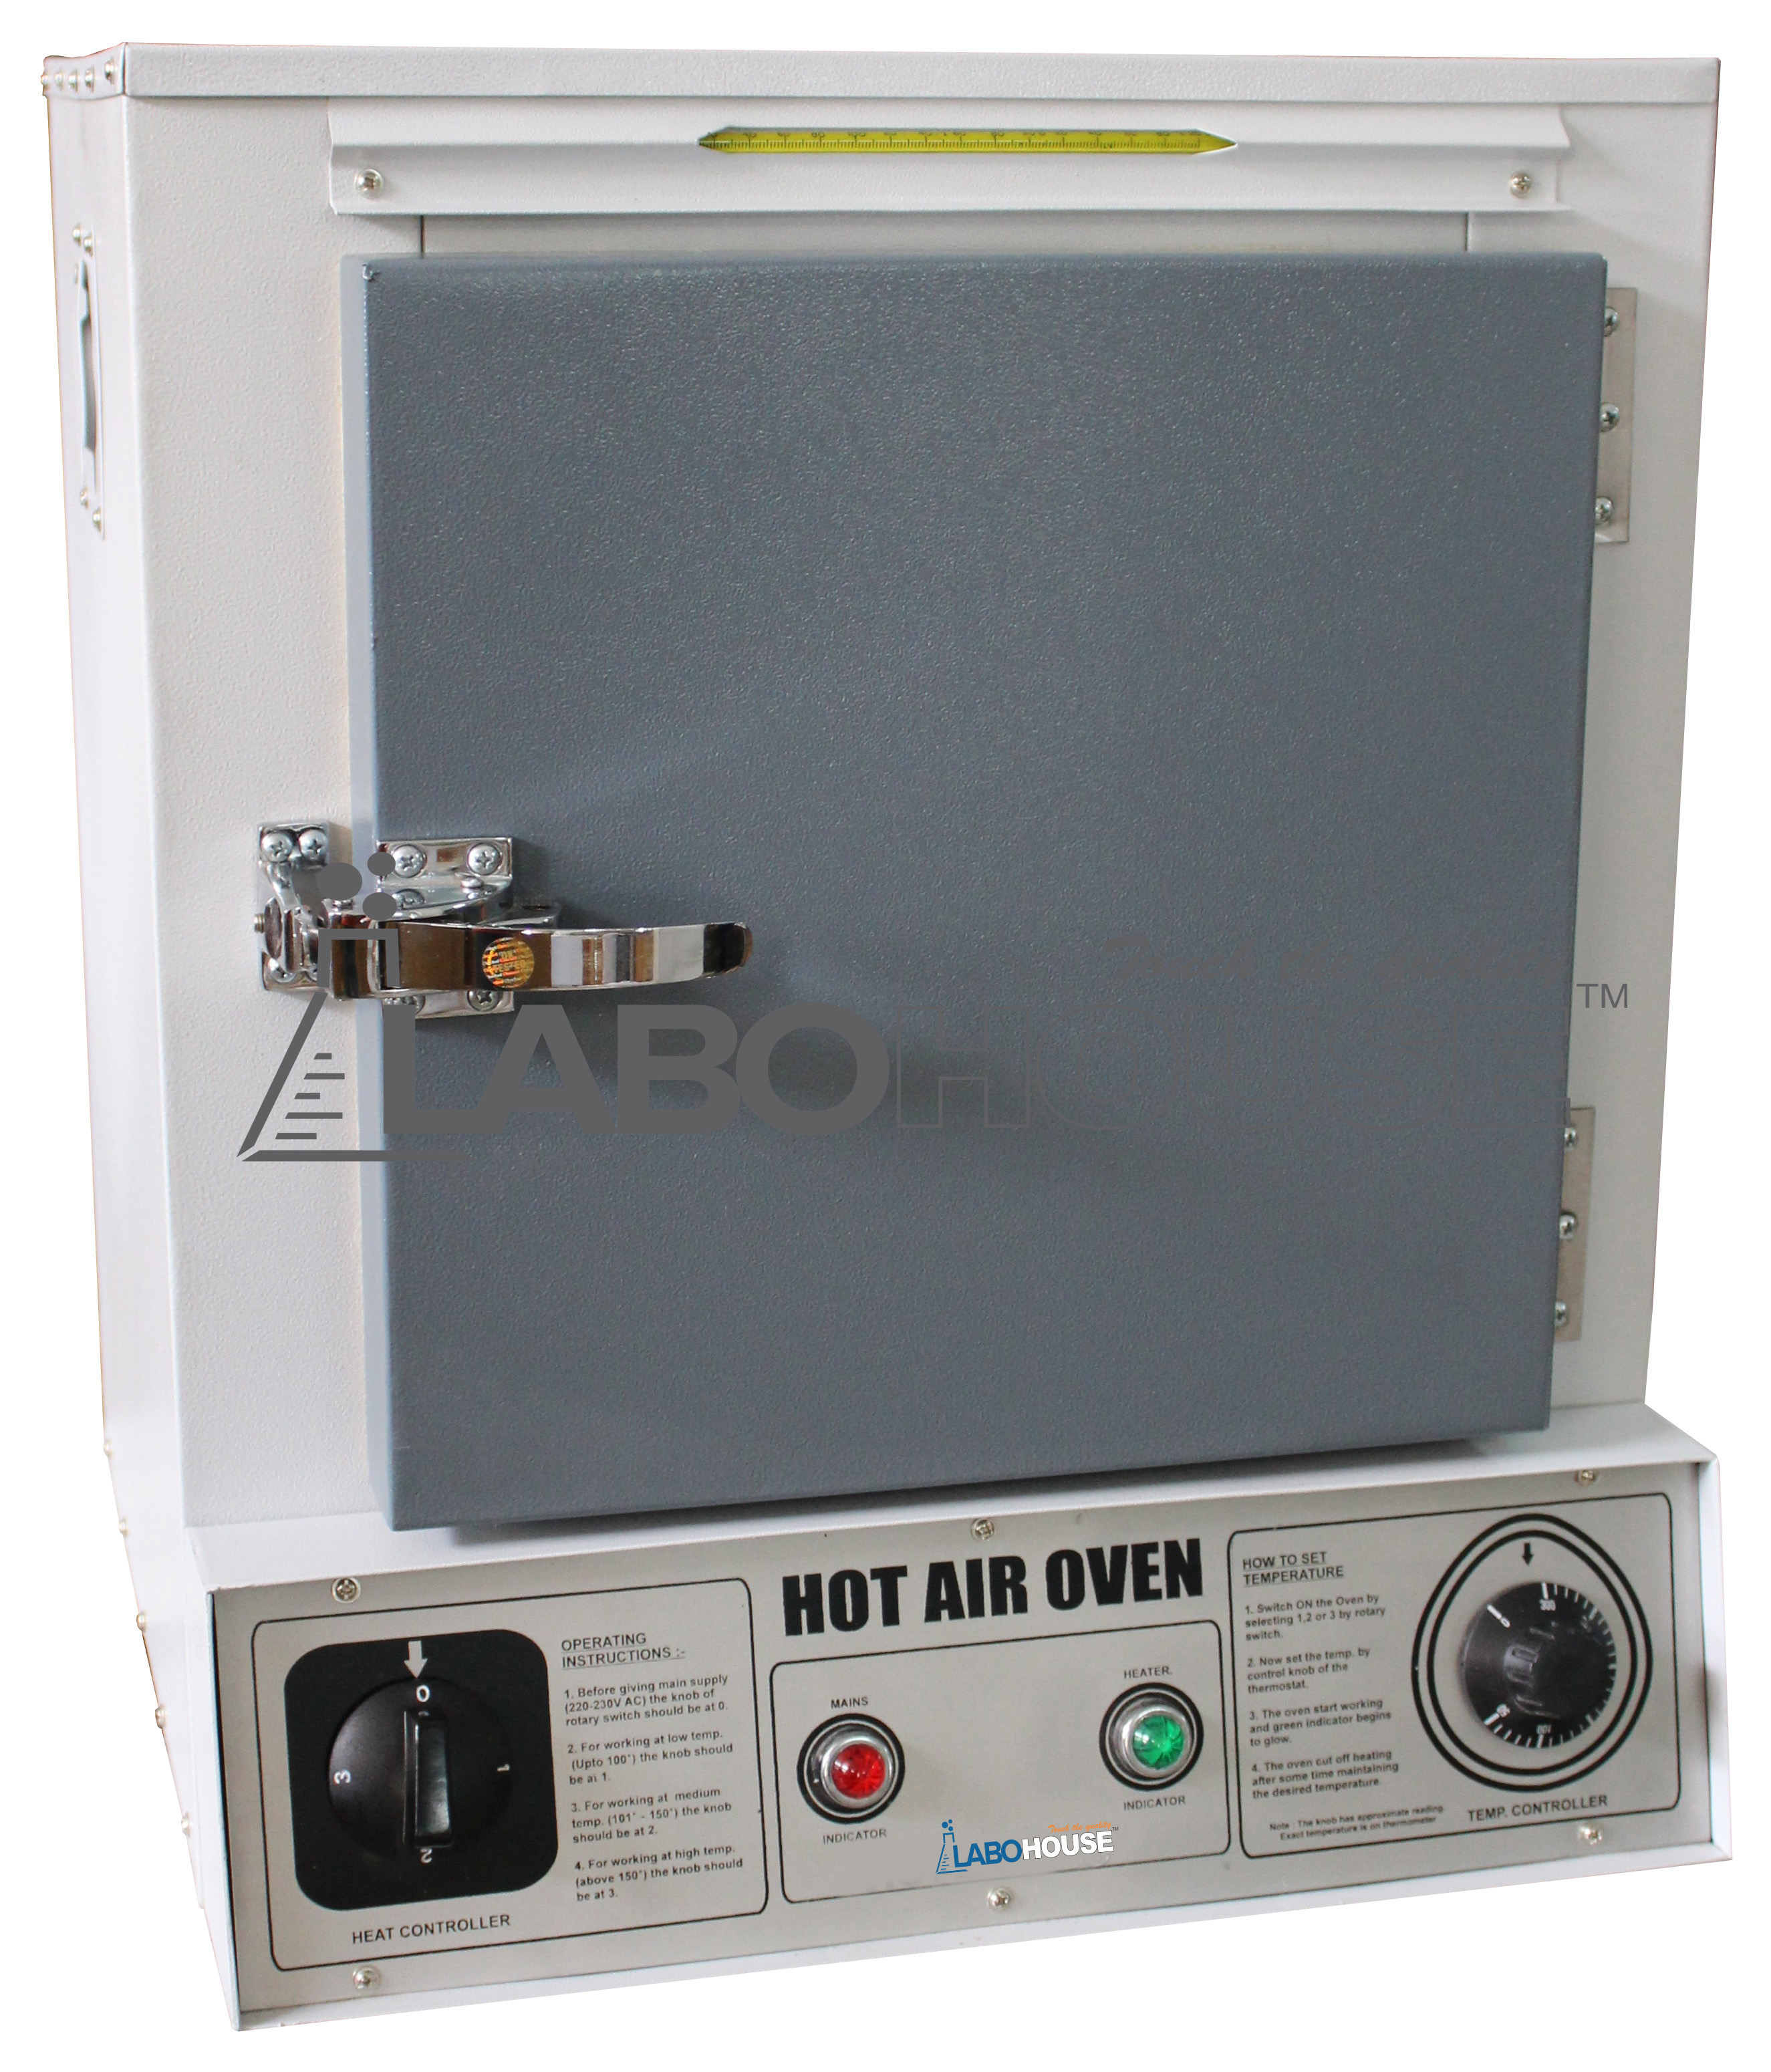 Hot Air Oven, LH 5.1 from LABOHOUSE